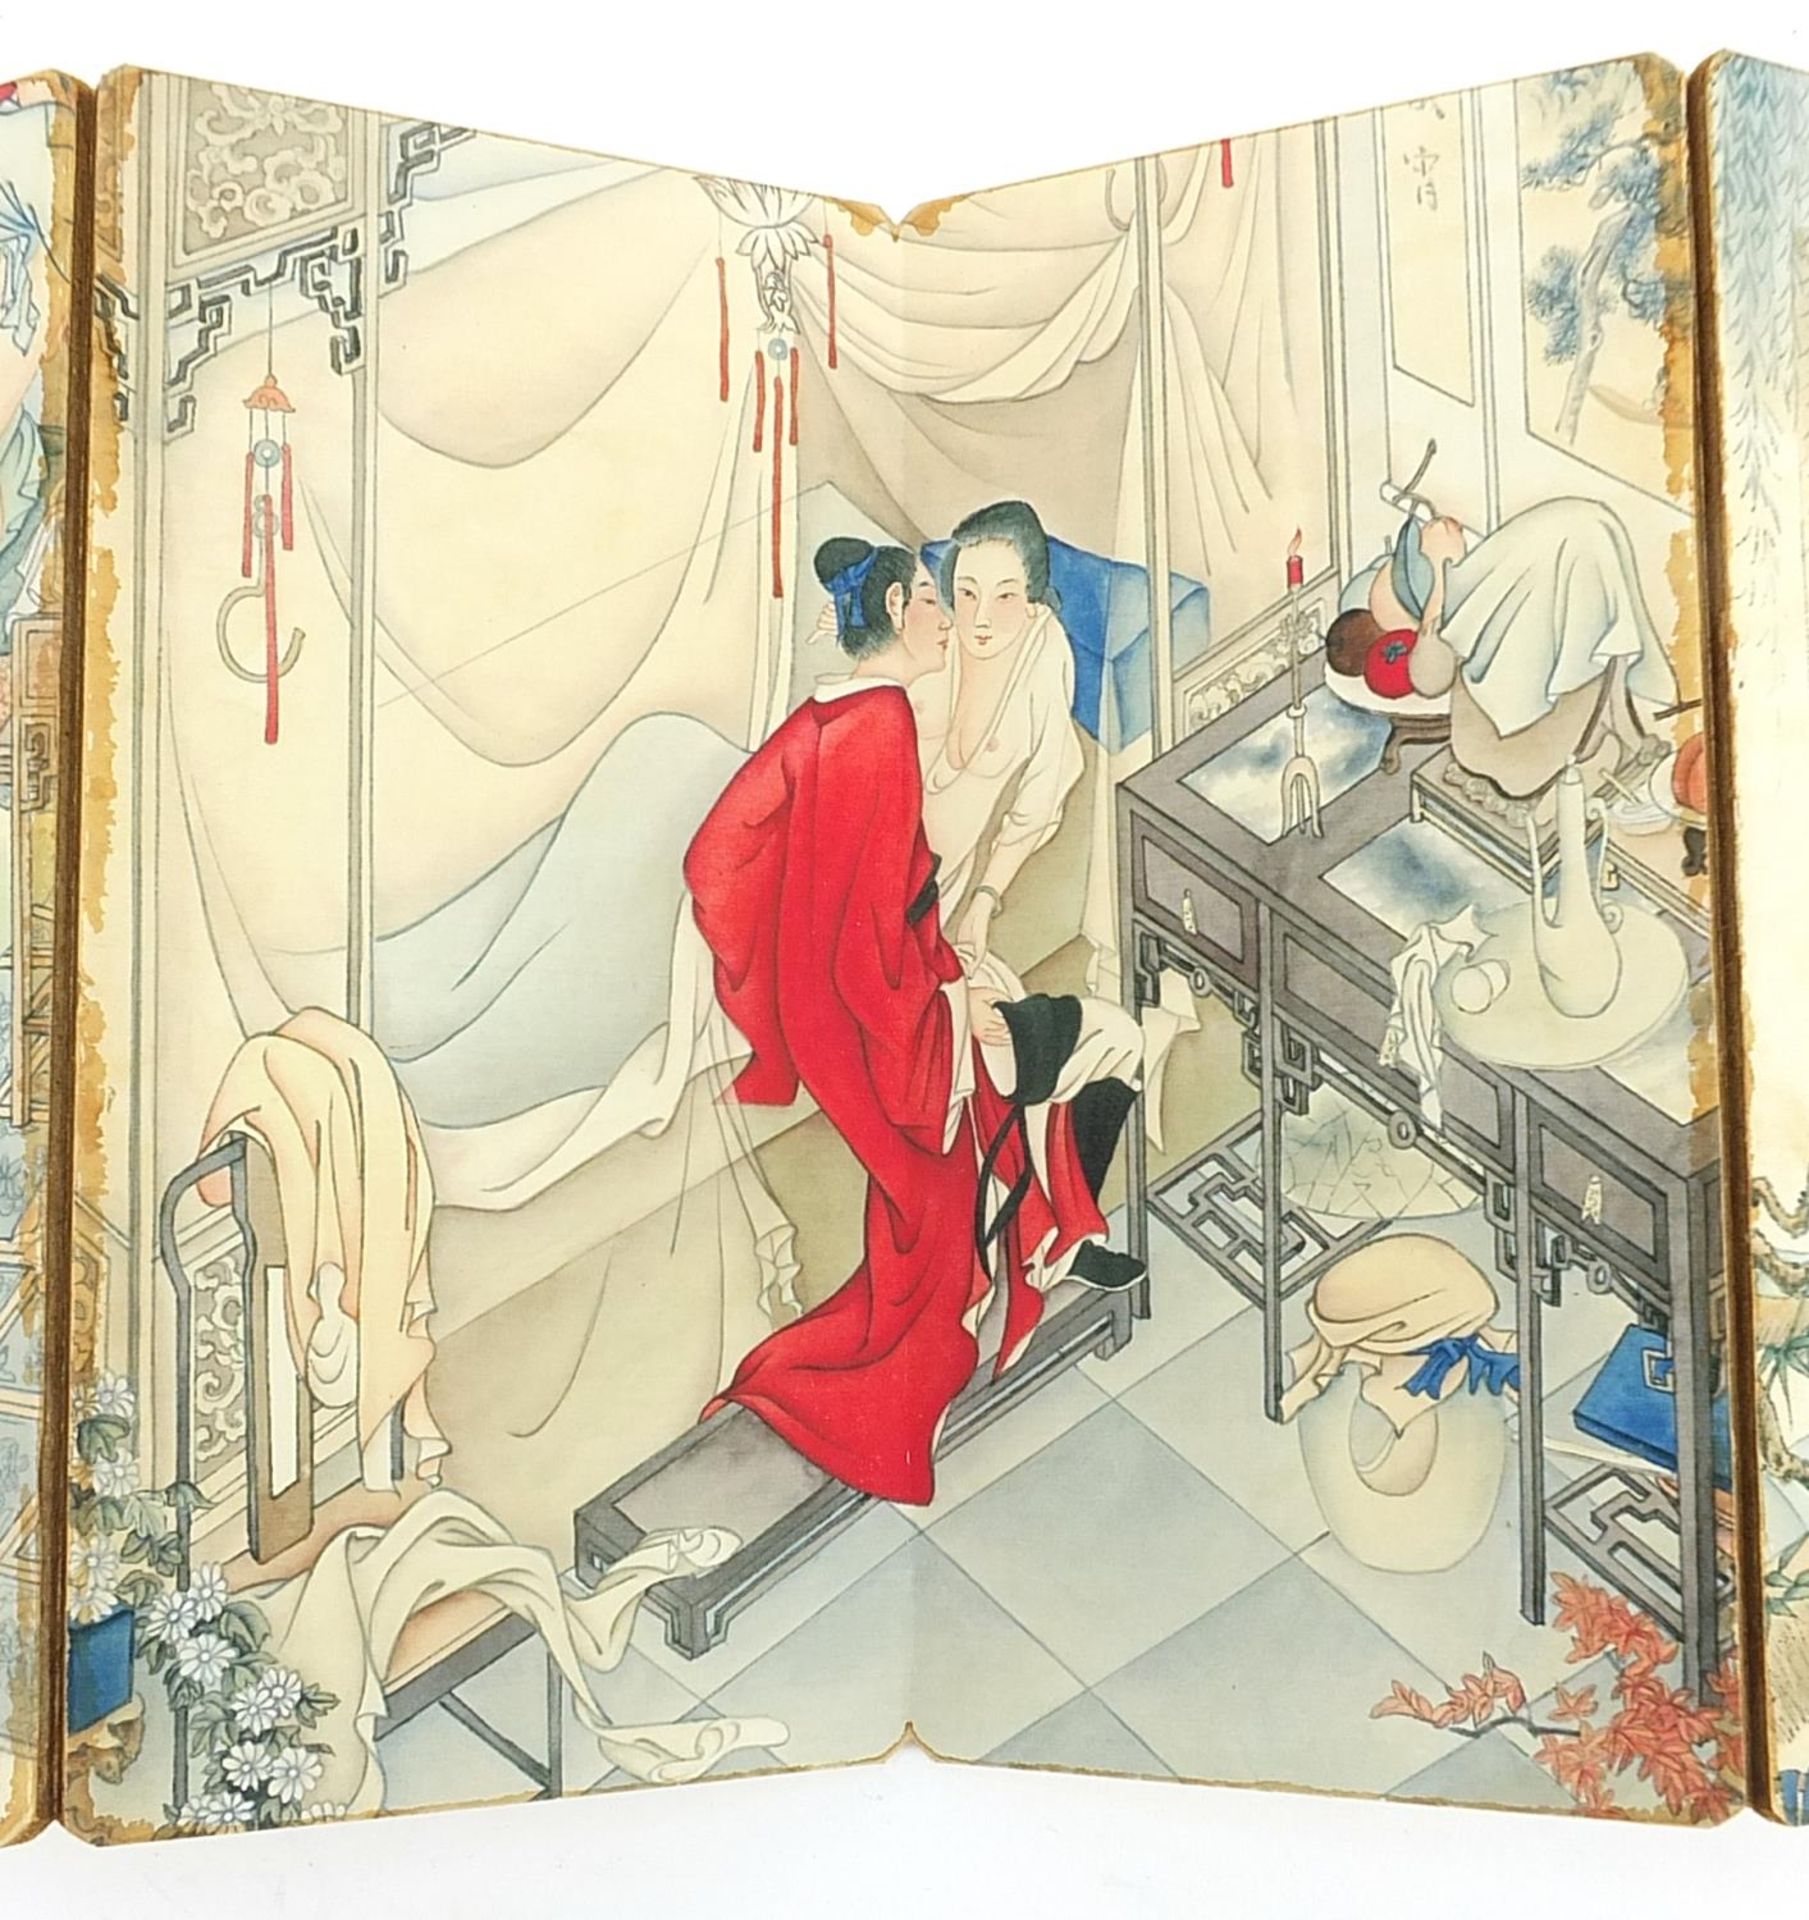 Chinese folding book depicting erotic scenes - Image 4 of 8